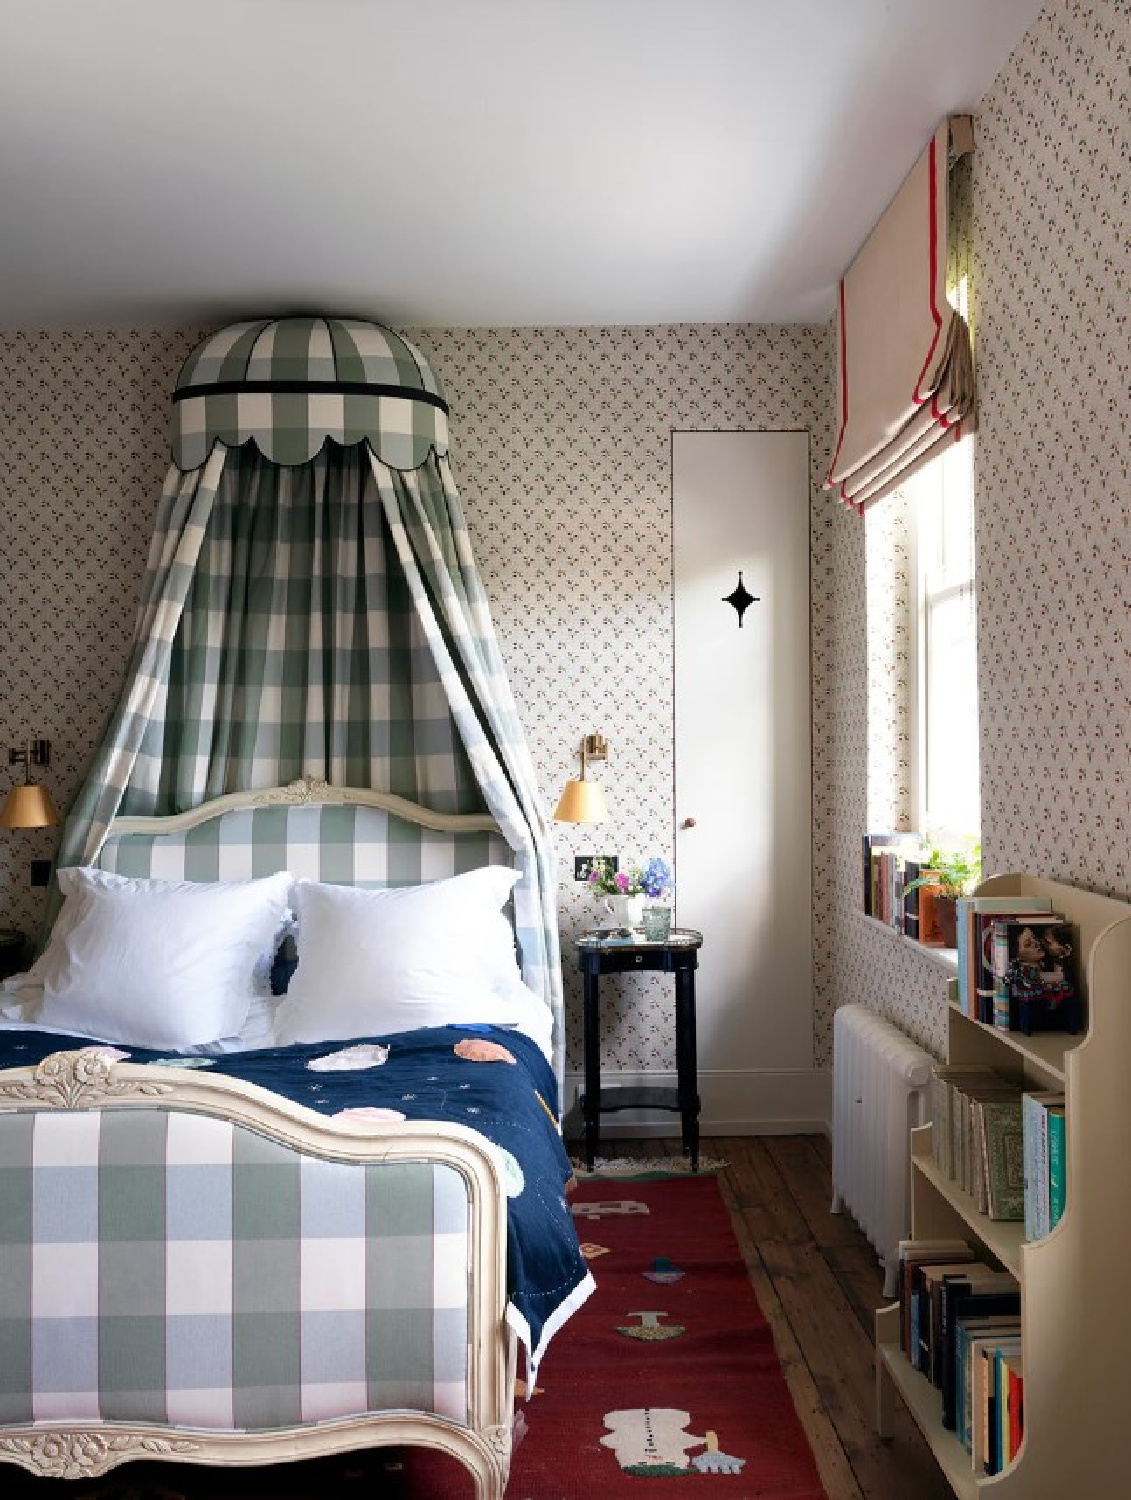 Blue large scale gingham in bedroom designed by Beata Heuman - photo by Simon Brown.